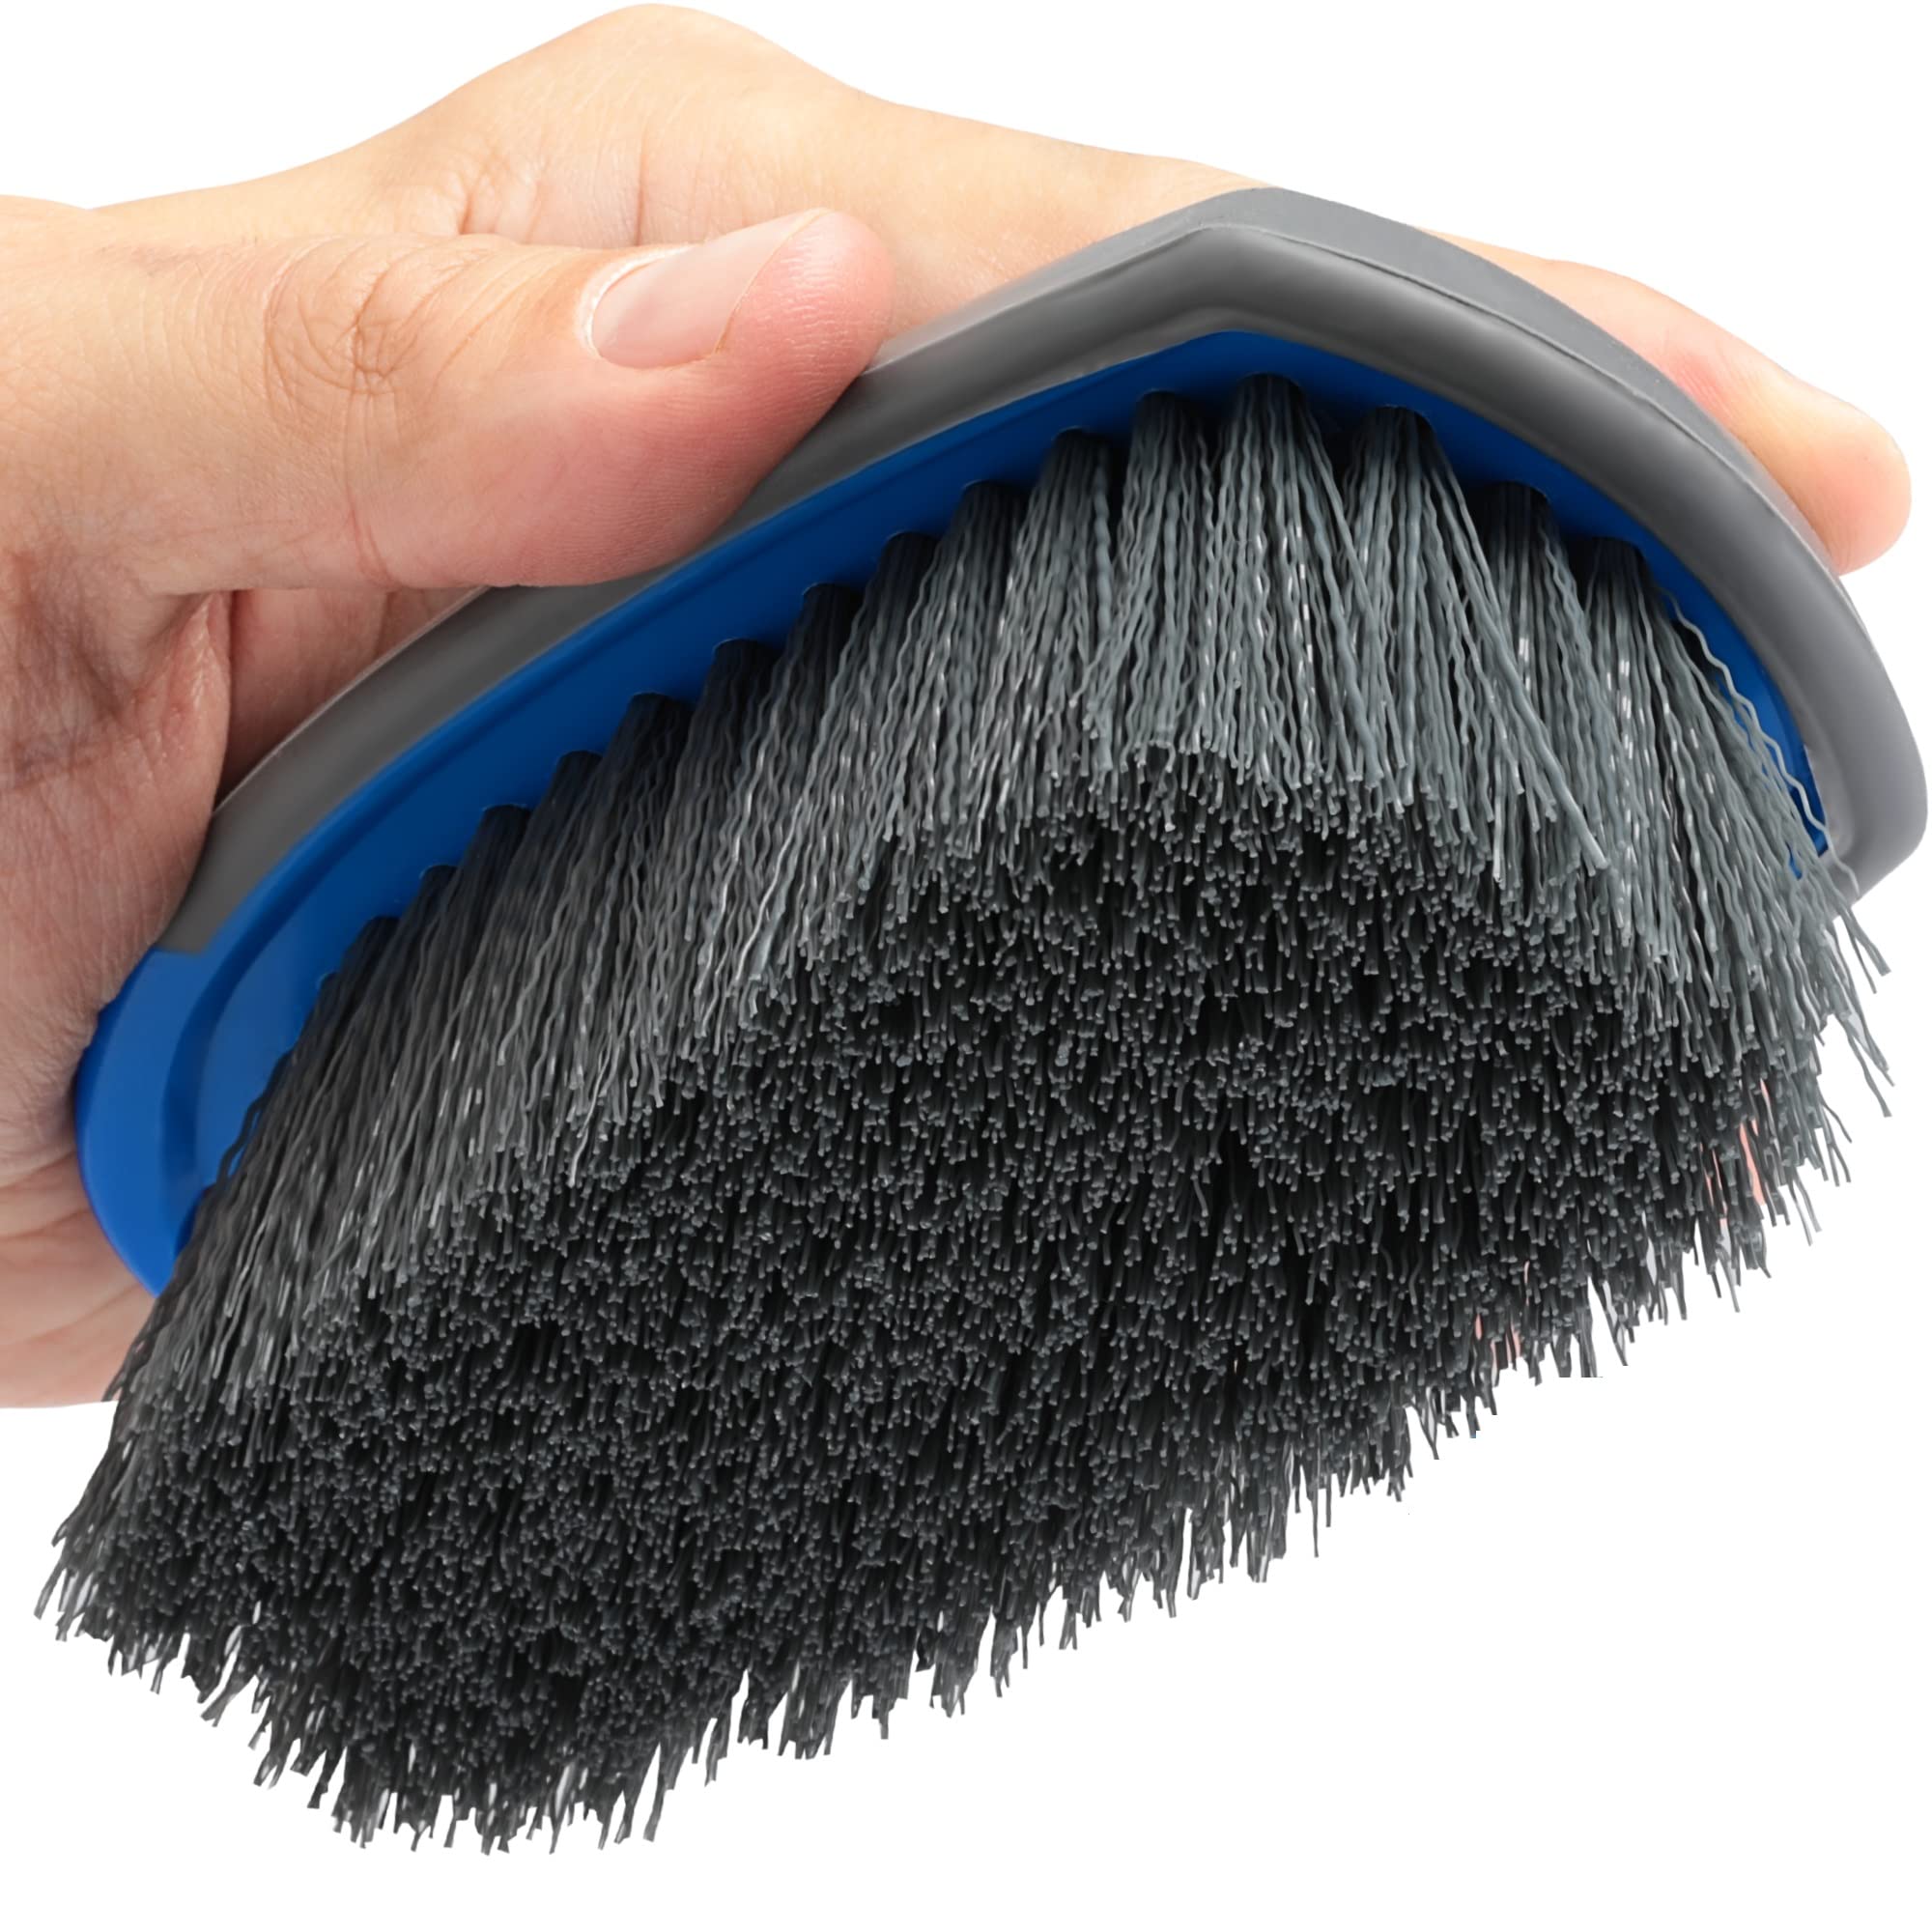 Carpet & Upholstery Cleaning Brushes - RESTORMATE